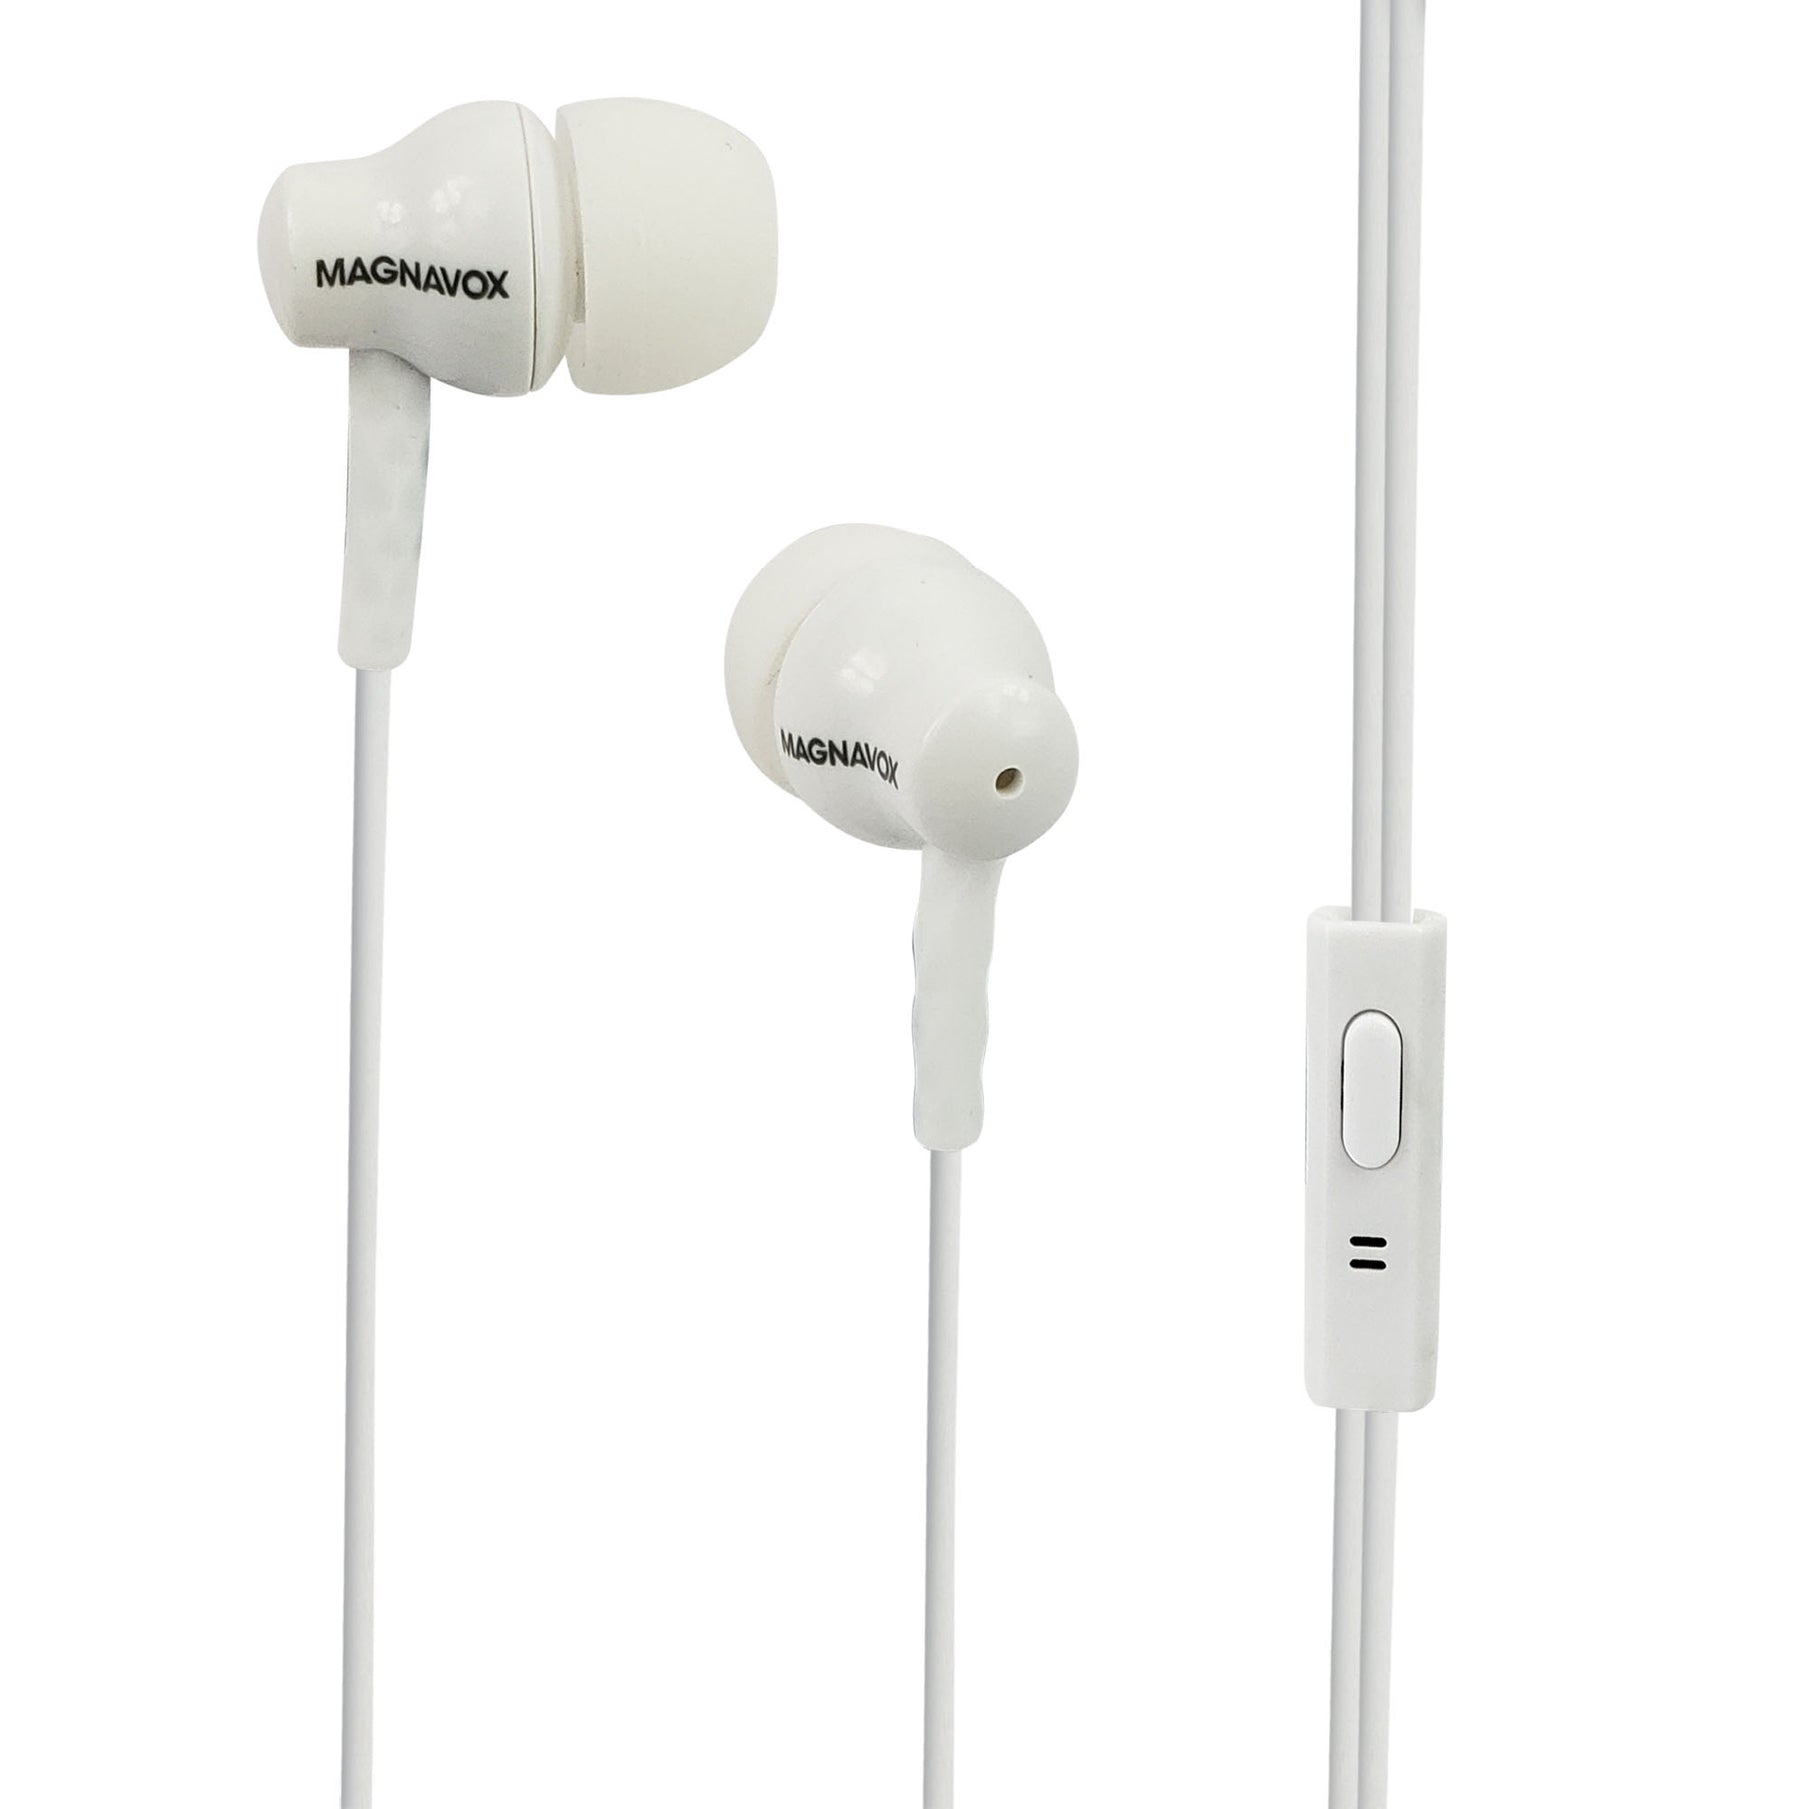 Magnavox Silicon Earbuds with Microphone - White